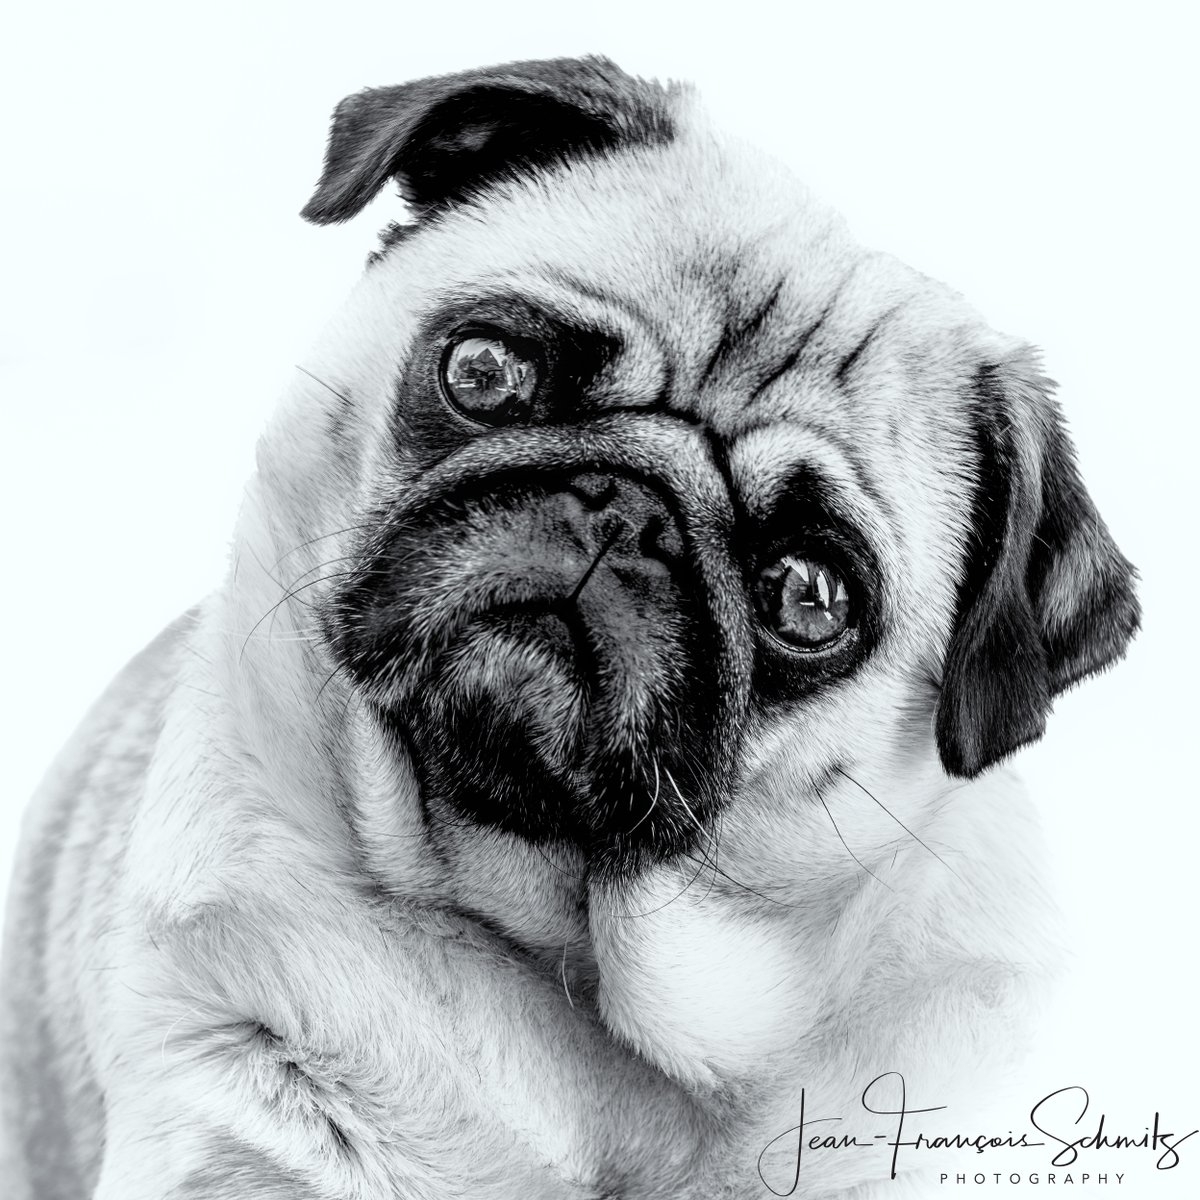 Color or B&W? Which one do you prefer ?
 #pug #puglife #puglove #pugs #dog #dogs #pugworld #pugoftheday #pugnation #puglover #mops #puglovers #doglover #pet #cute #dogoftheday #carlin #blackandwhite #blackandwhitephotography #canon #canonbelgium #canonR5